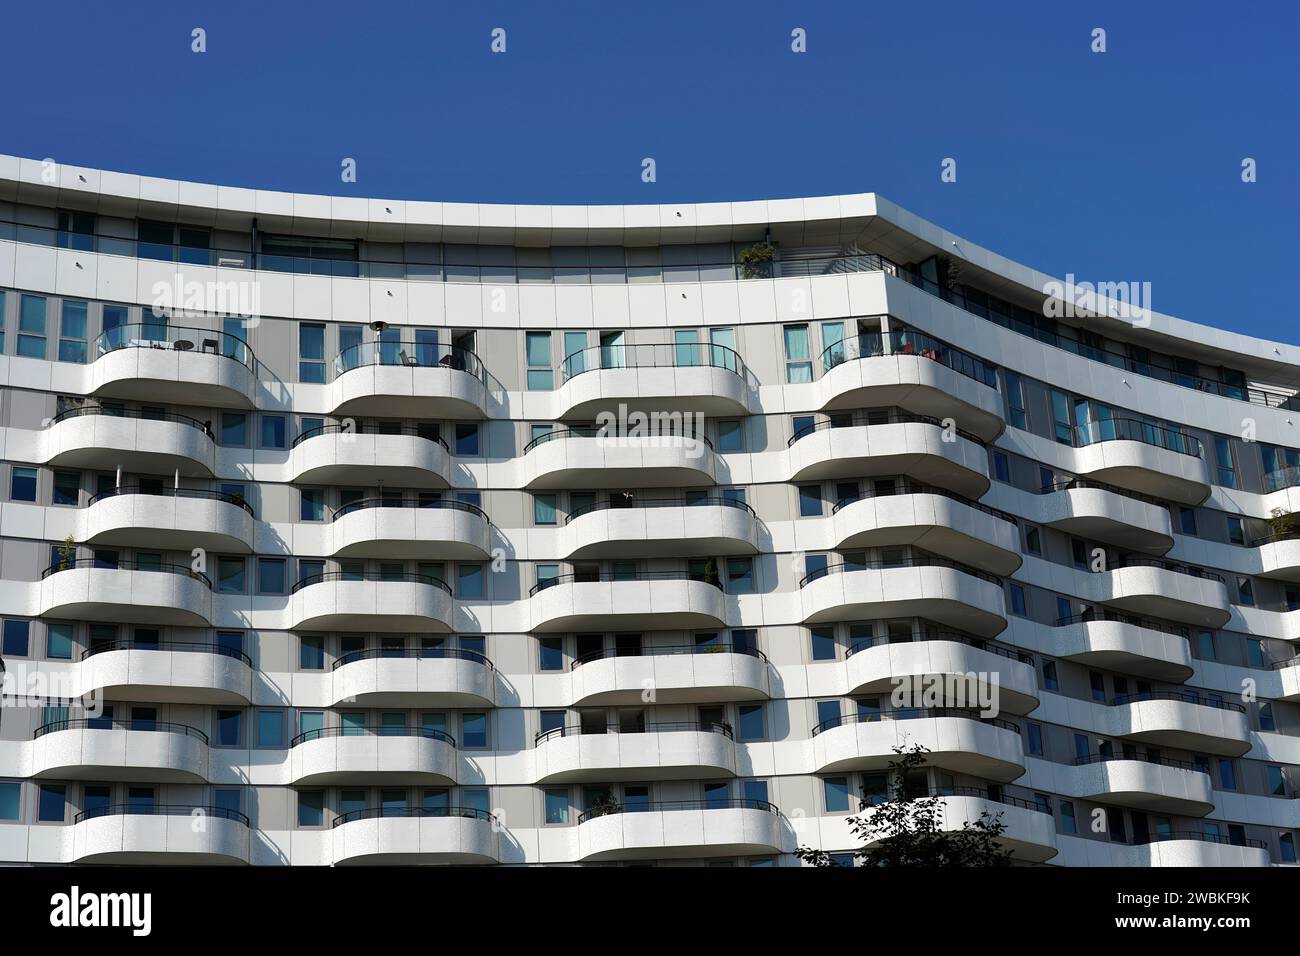 Germany, North Rhine-Westphalia, Cologne, modern residential complex, facade, curved balconies Stock Photo